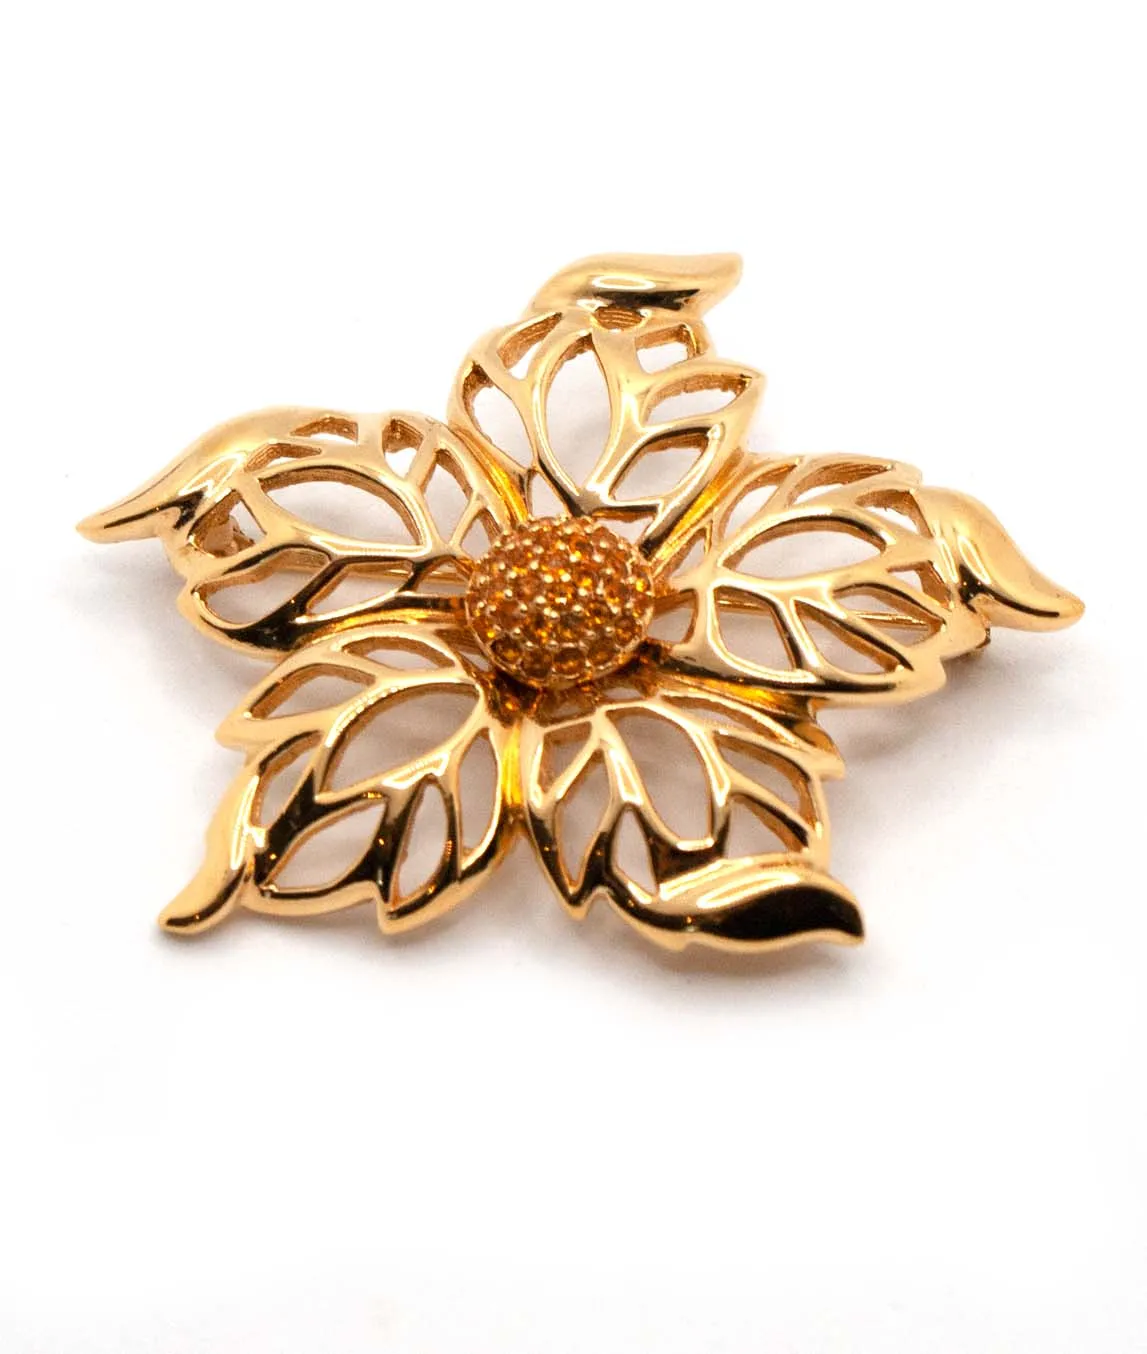 Gold plated with orange centre brooch pin by Christian Dior